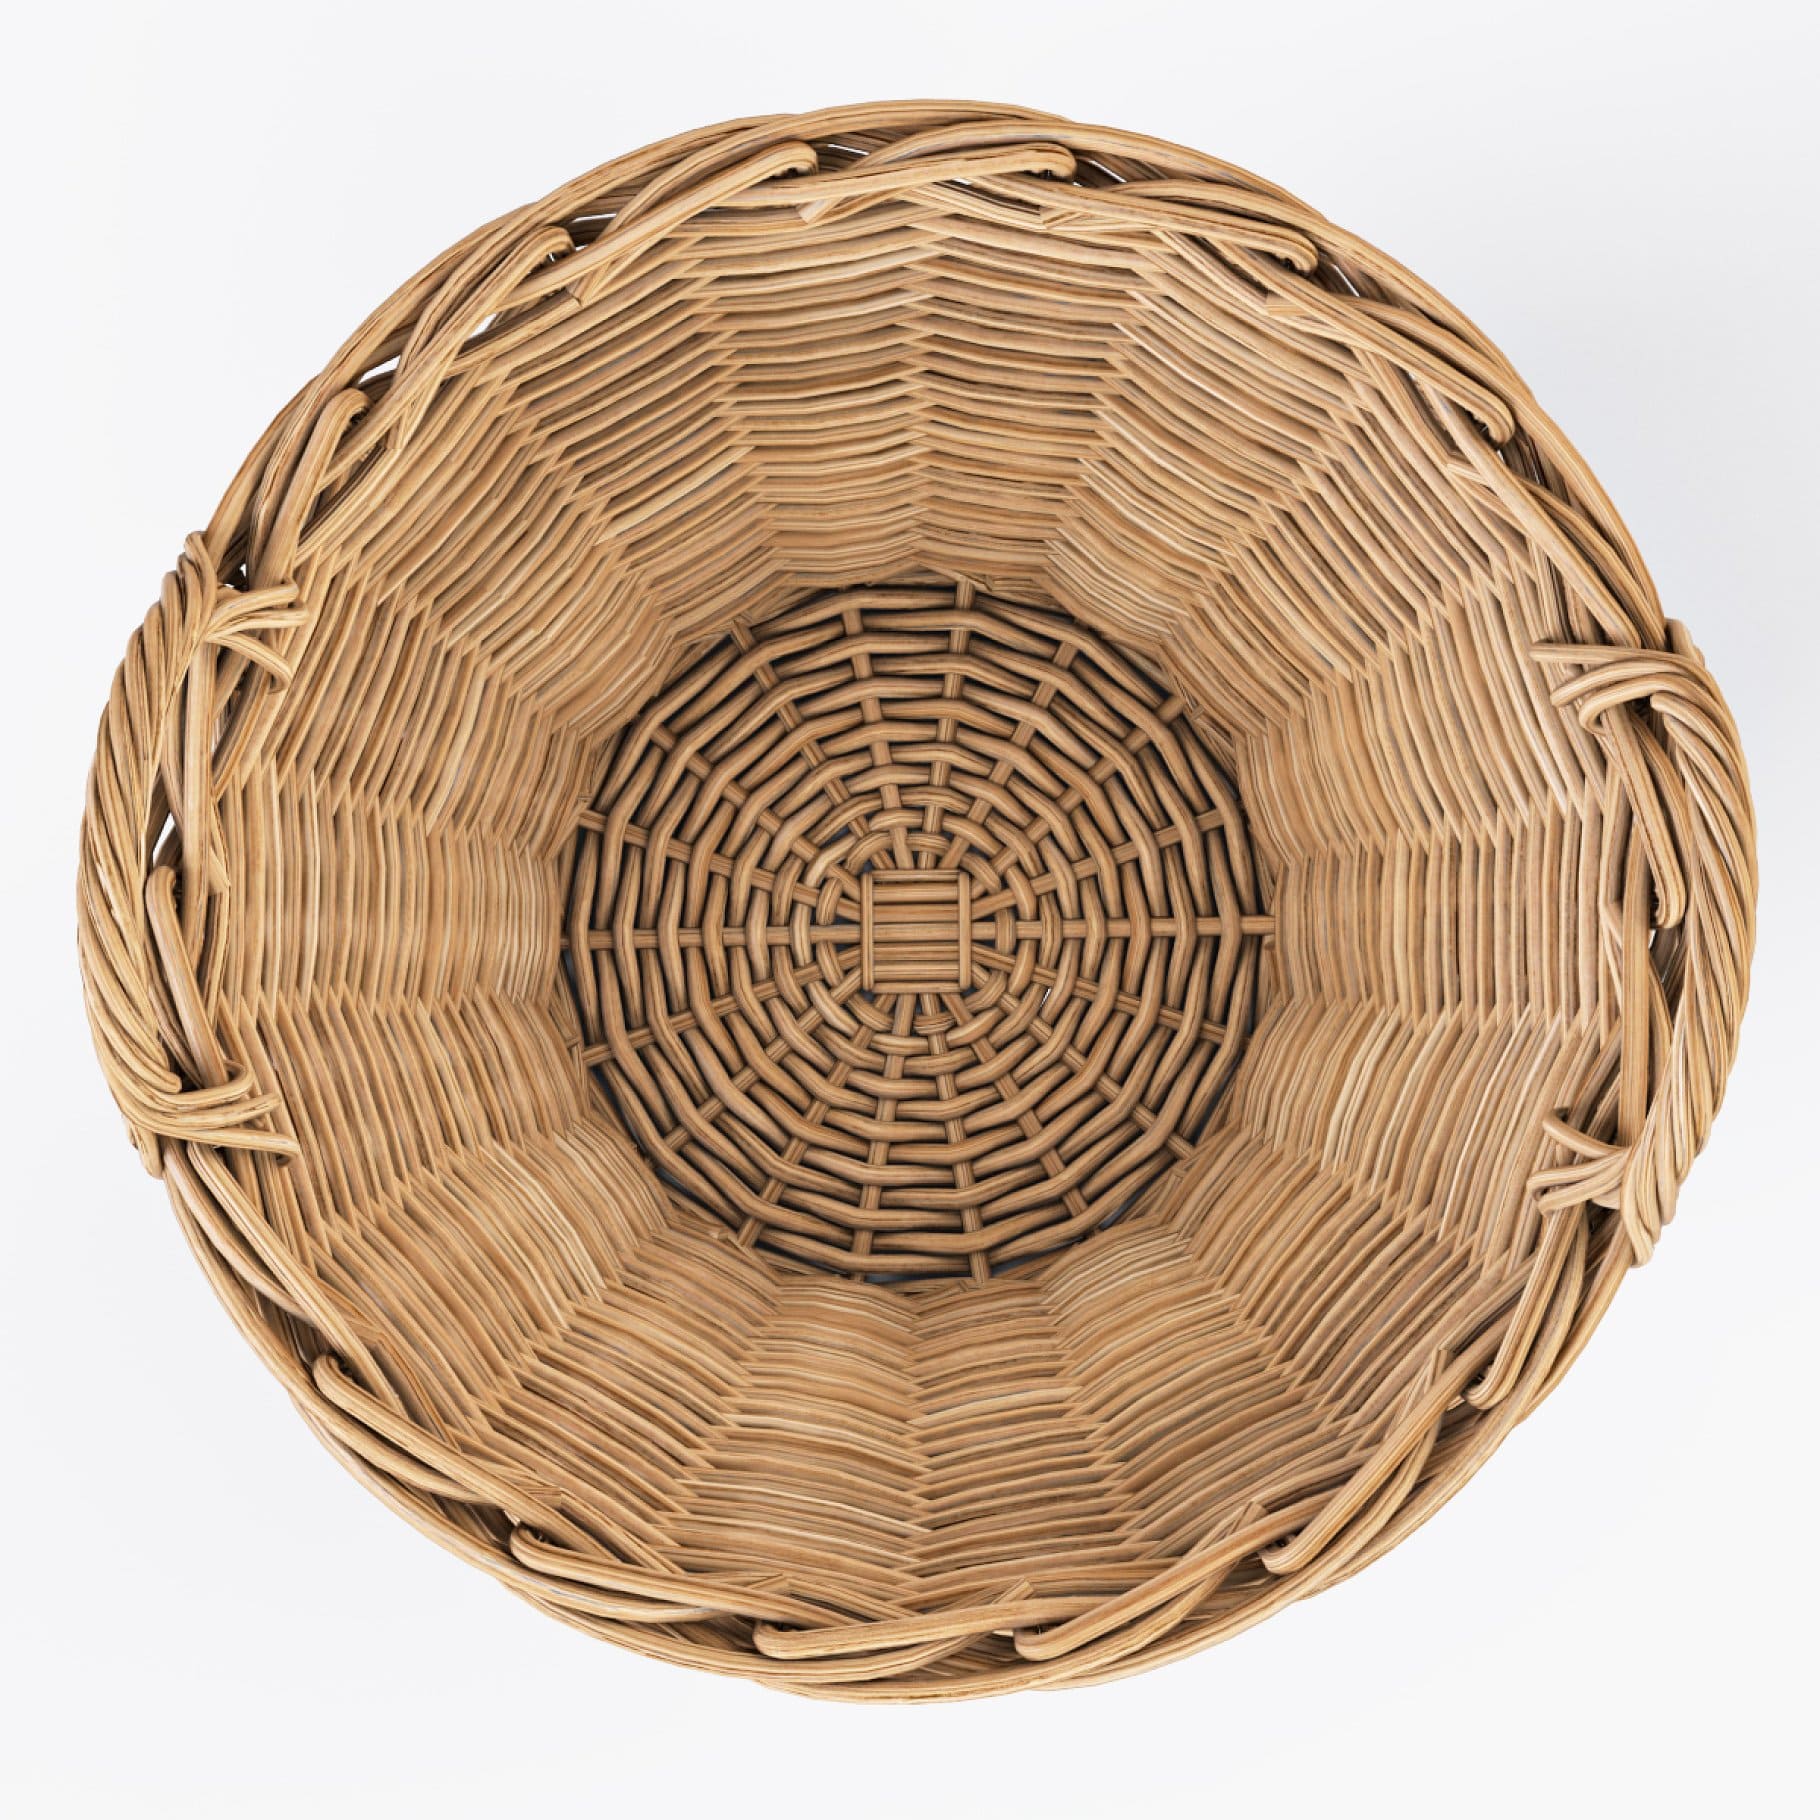 The bottom is shown inside the basket.